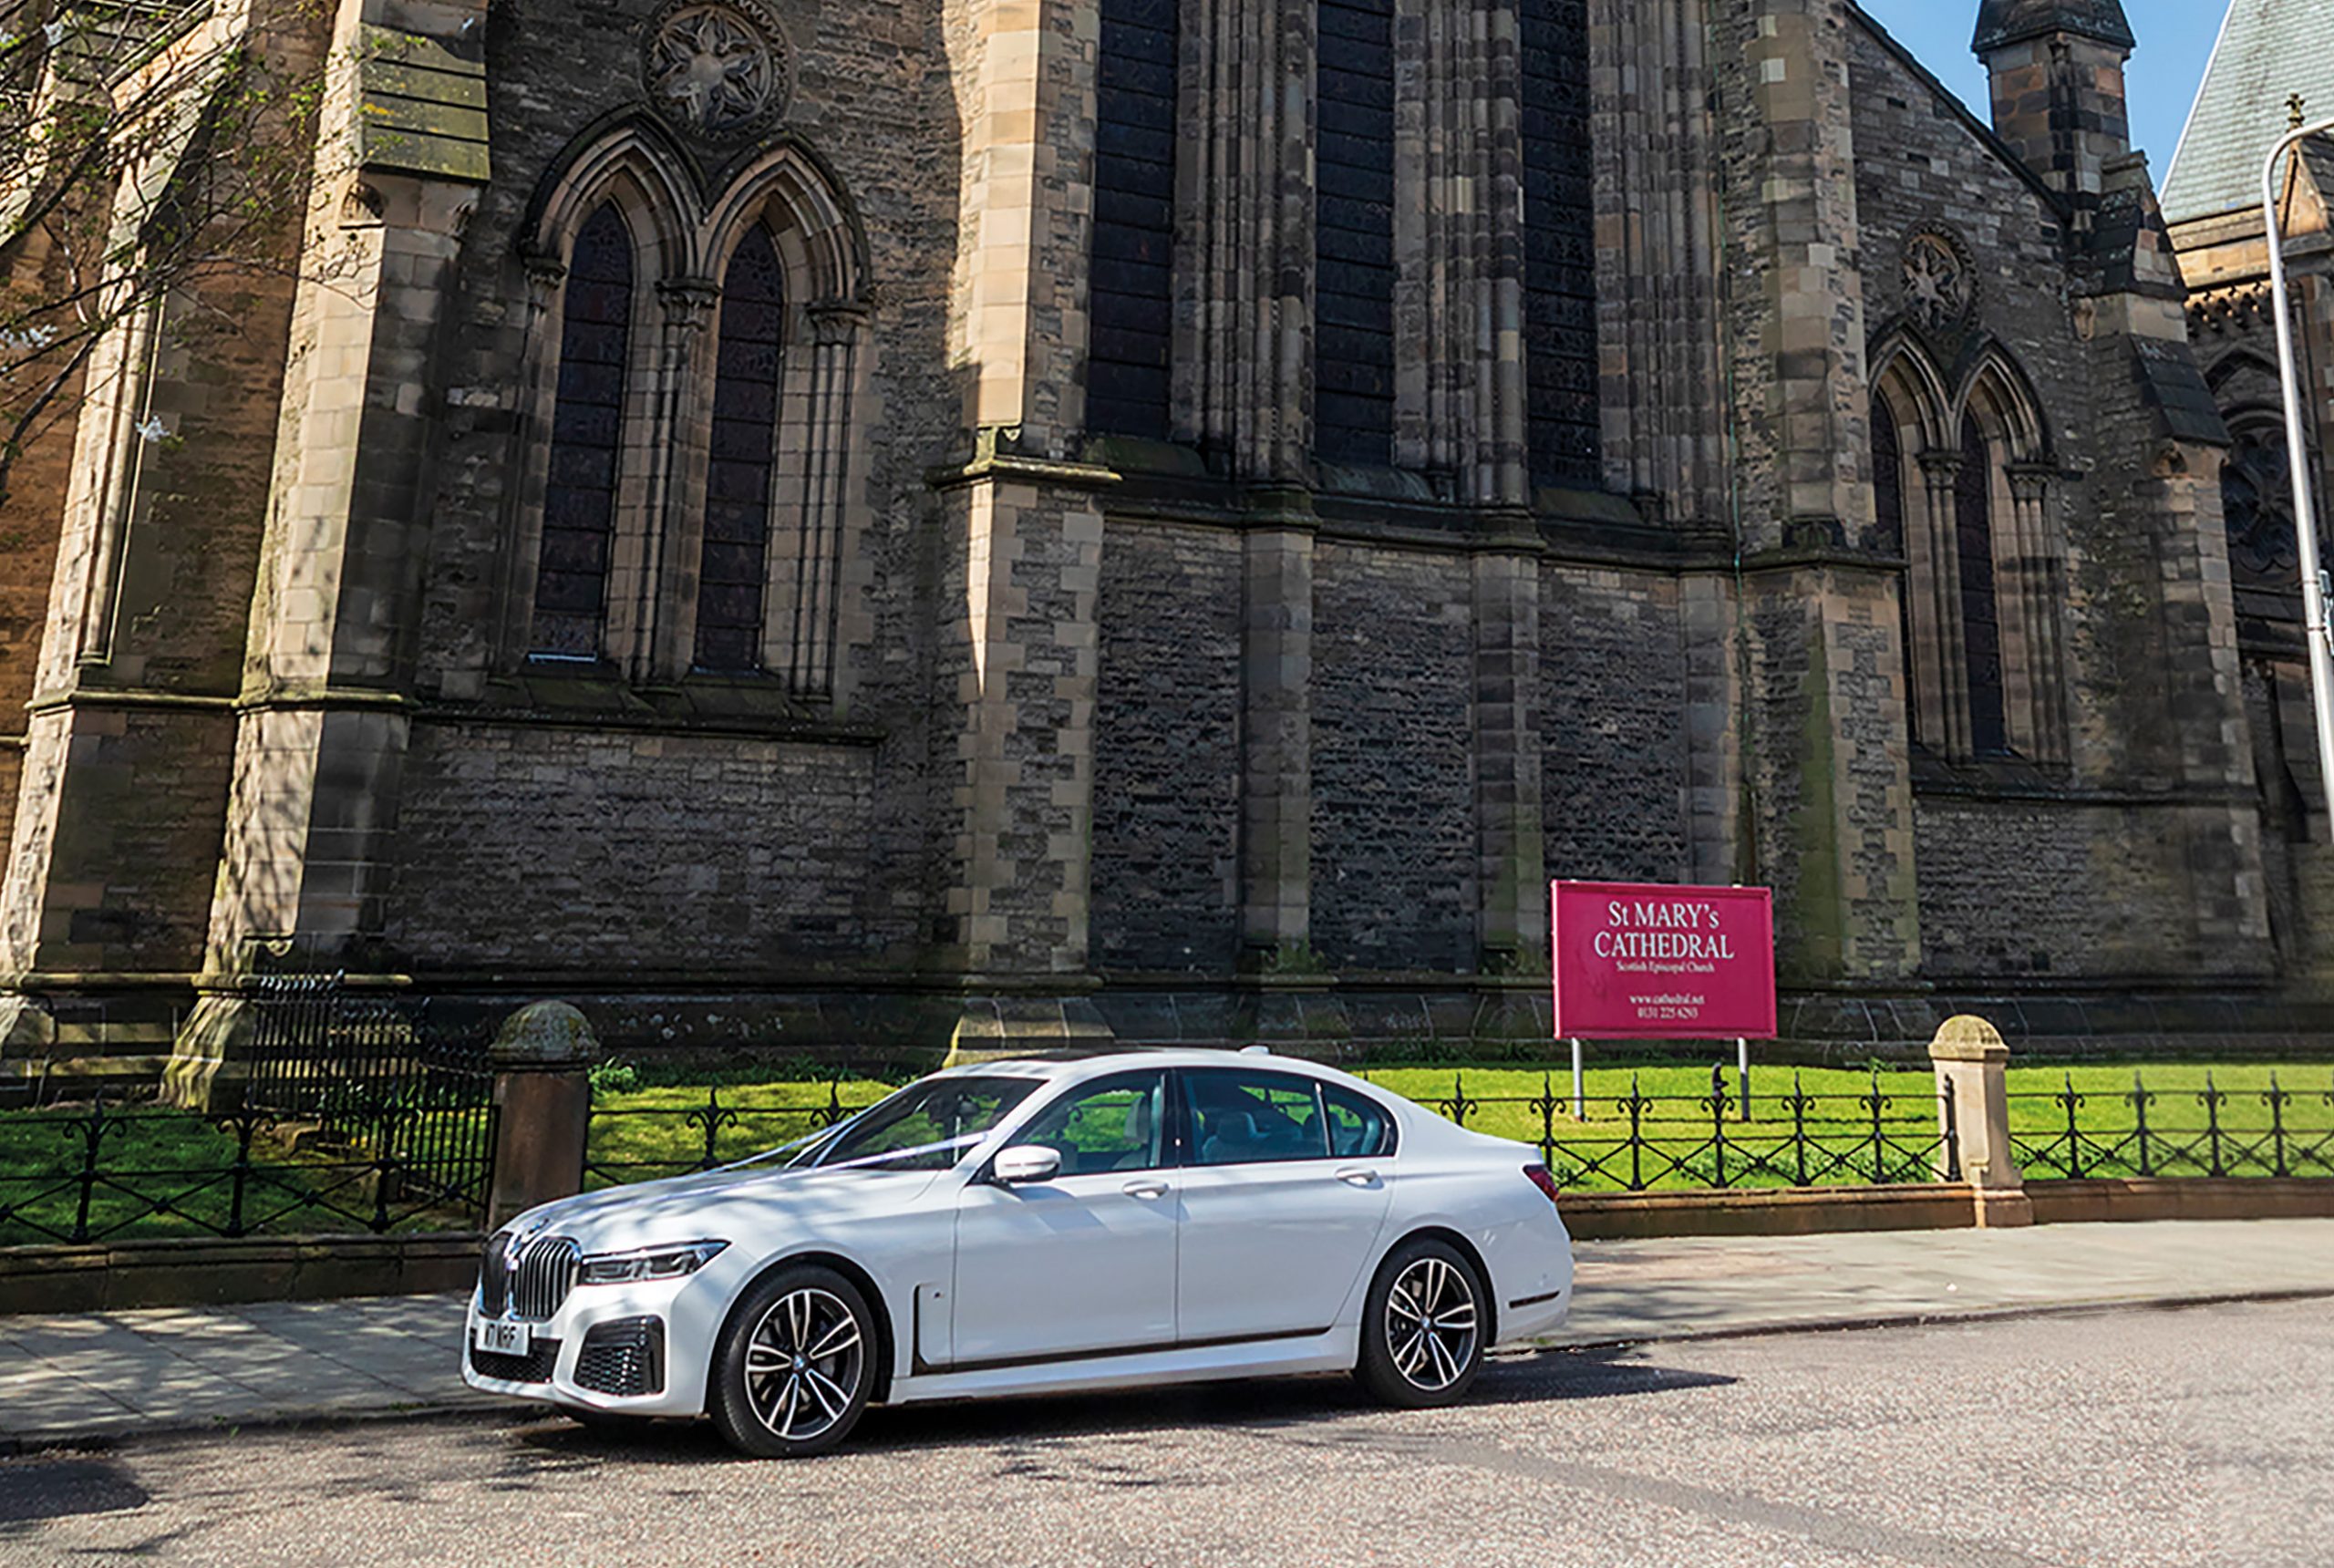 st-marys-cathedral-wedding-chauffeured-experience-white7